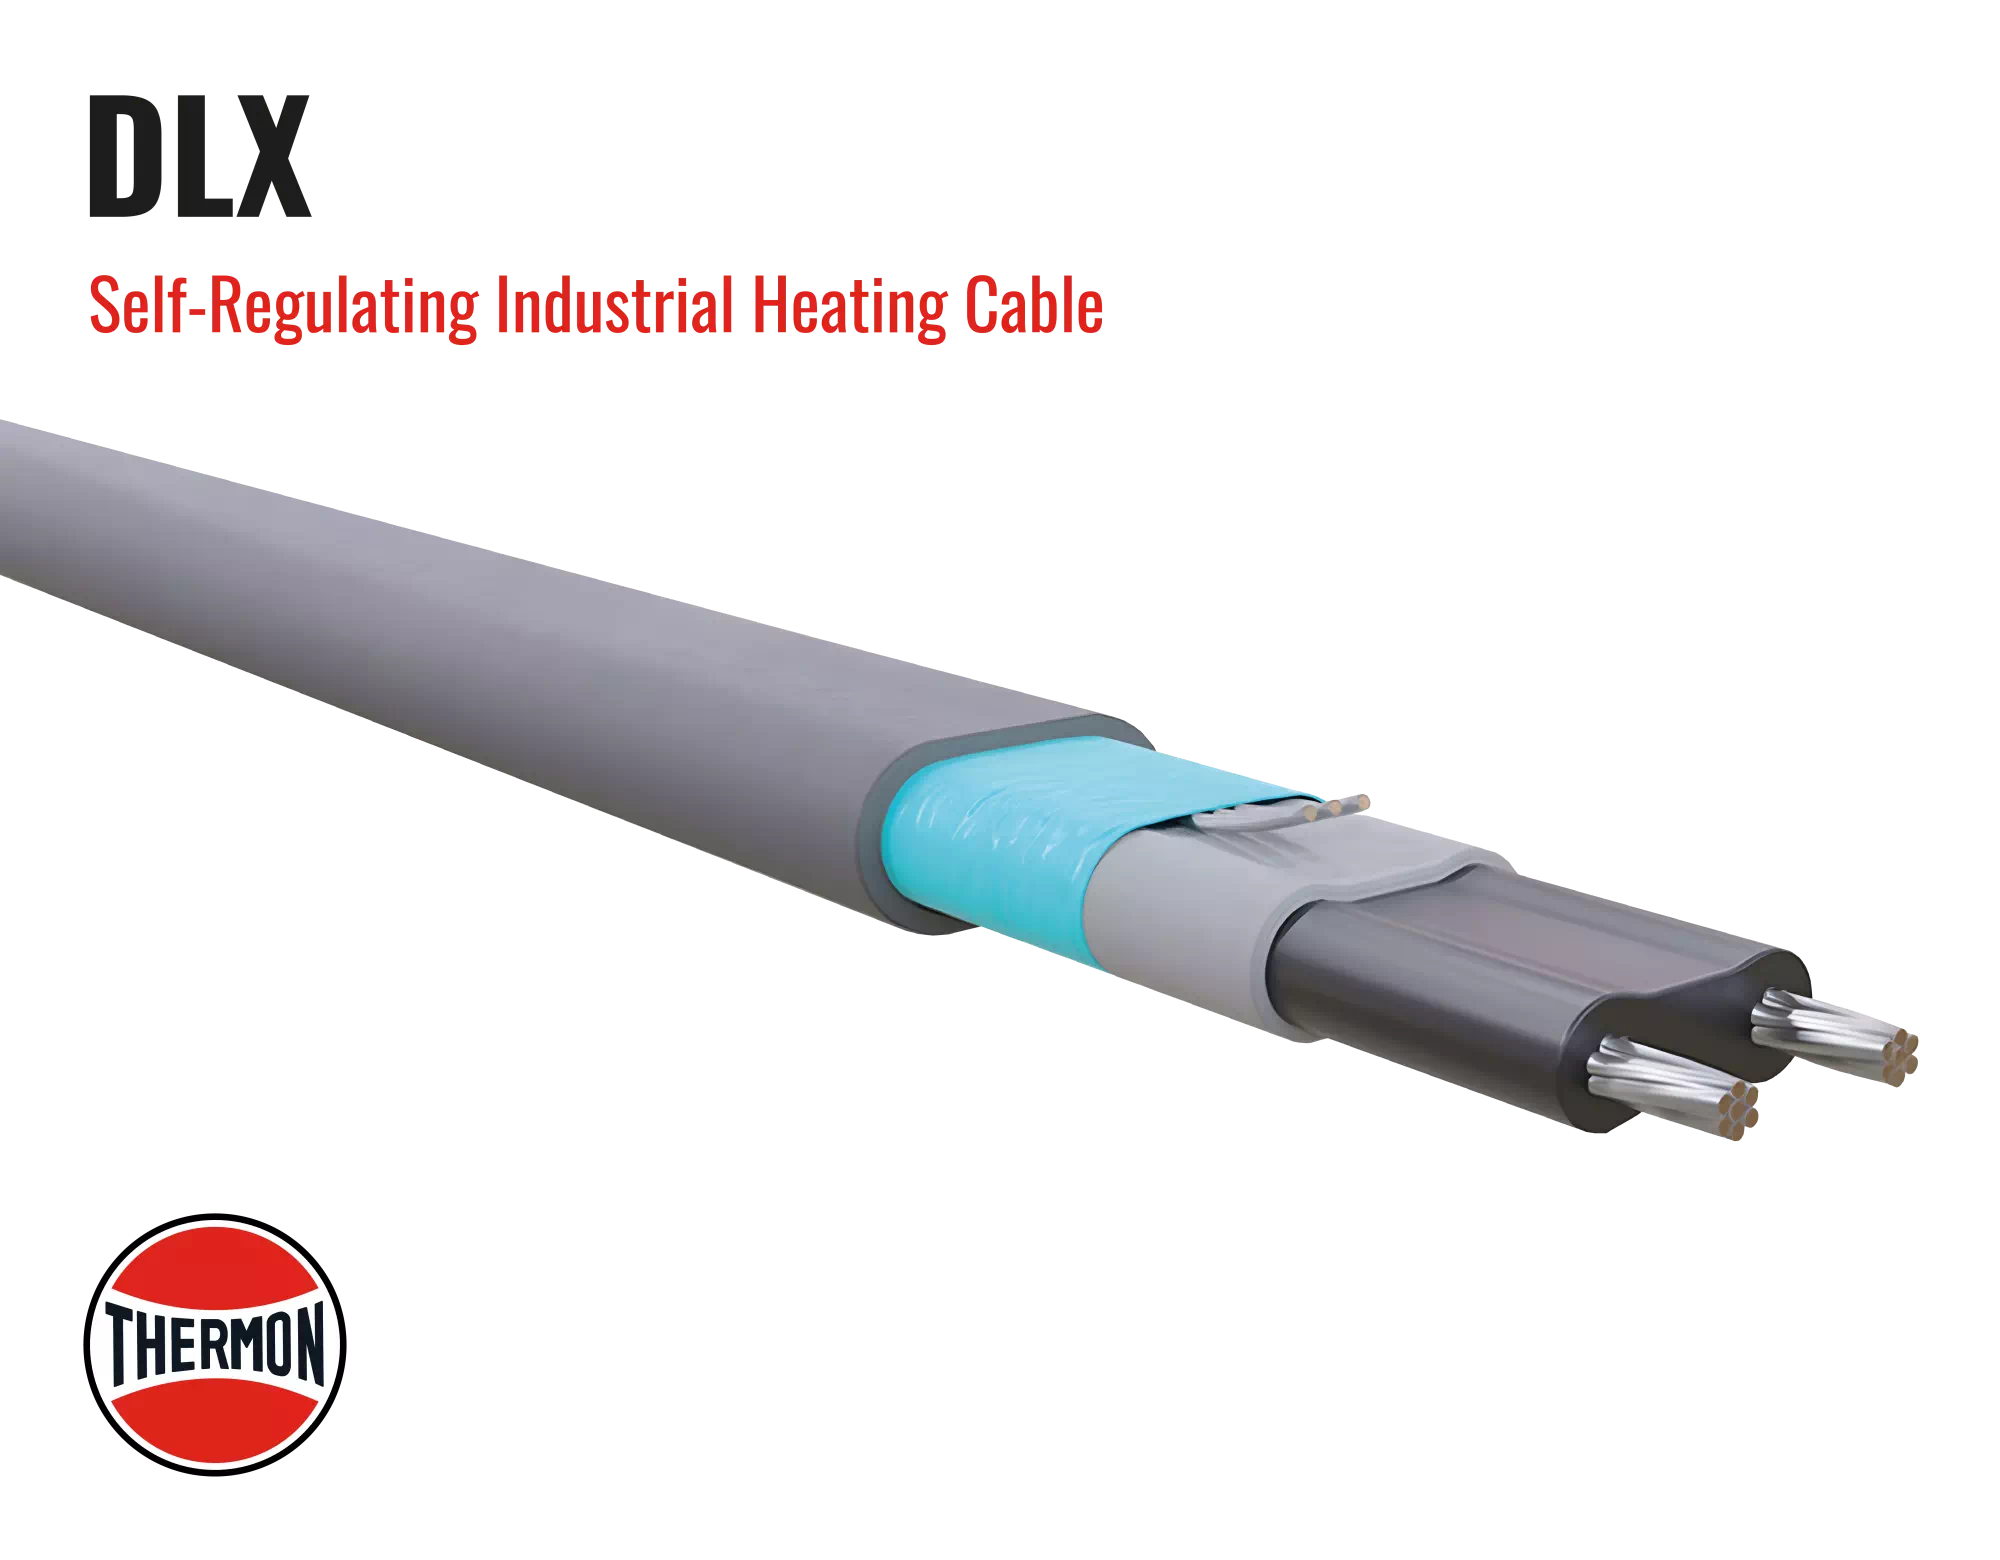 Thermon DLX-Self-Regulating-Heating-Cable